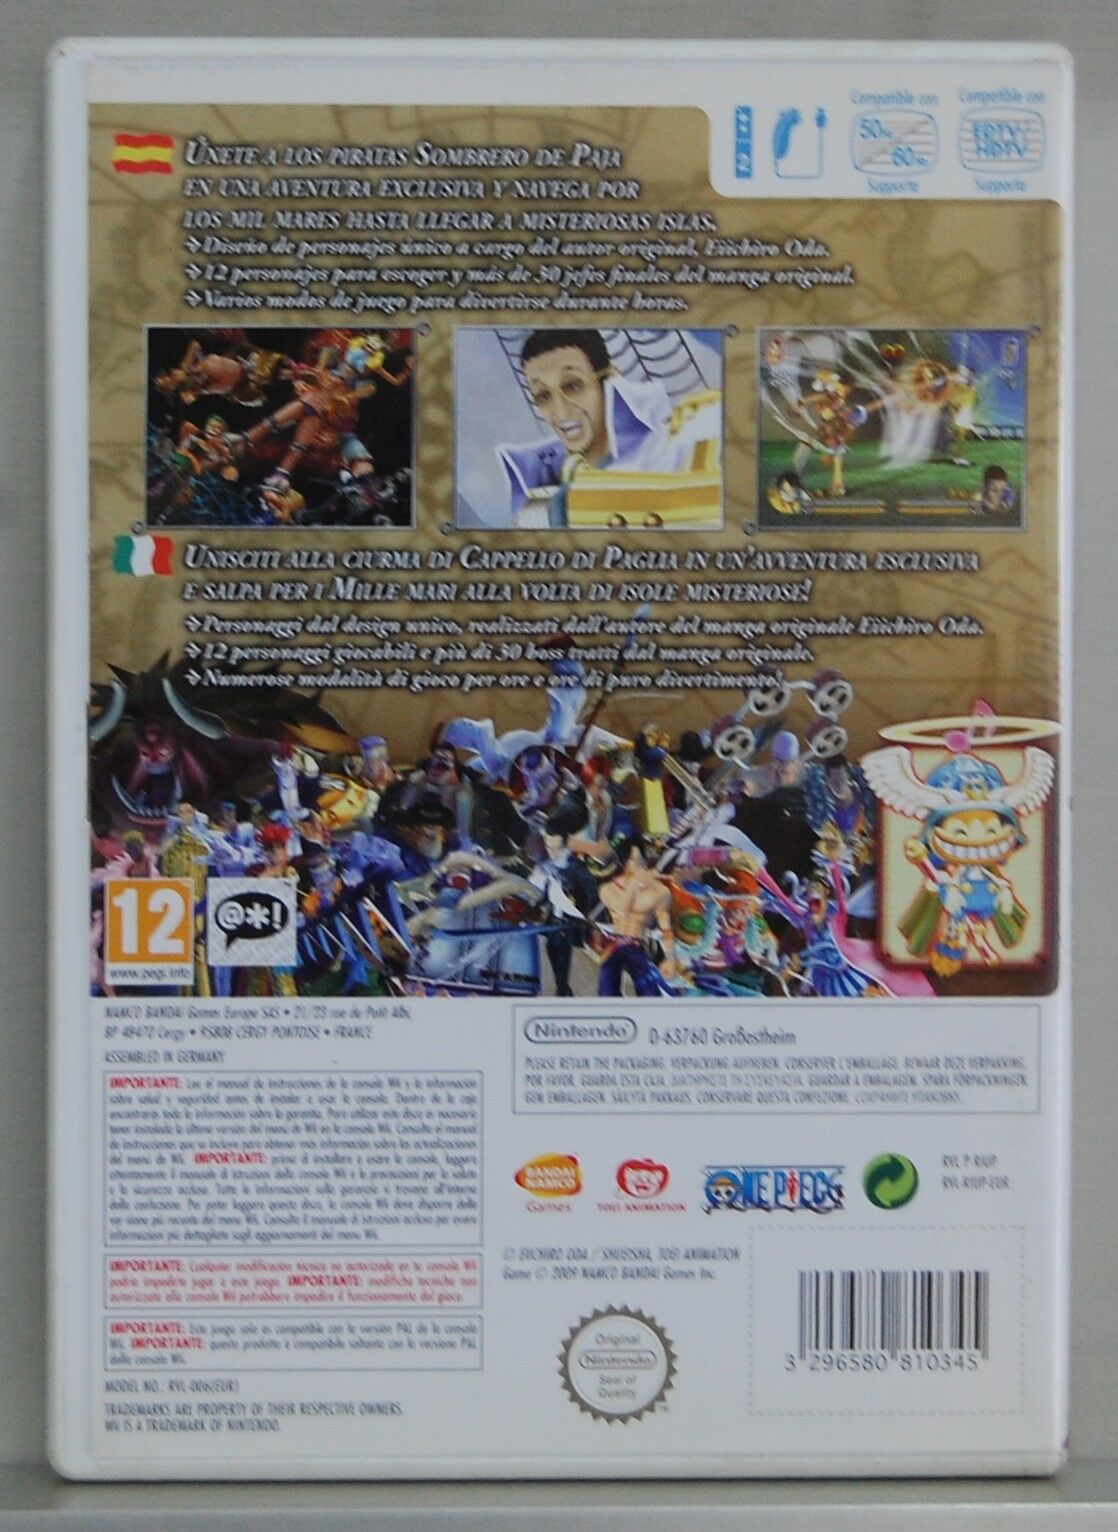 WII ONE PIECE UNLIMITED CRUISE 2 USATO